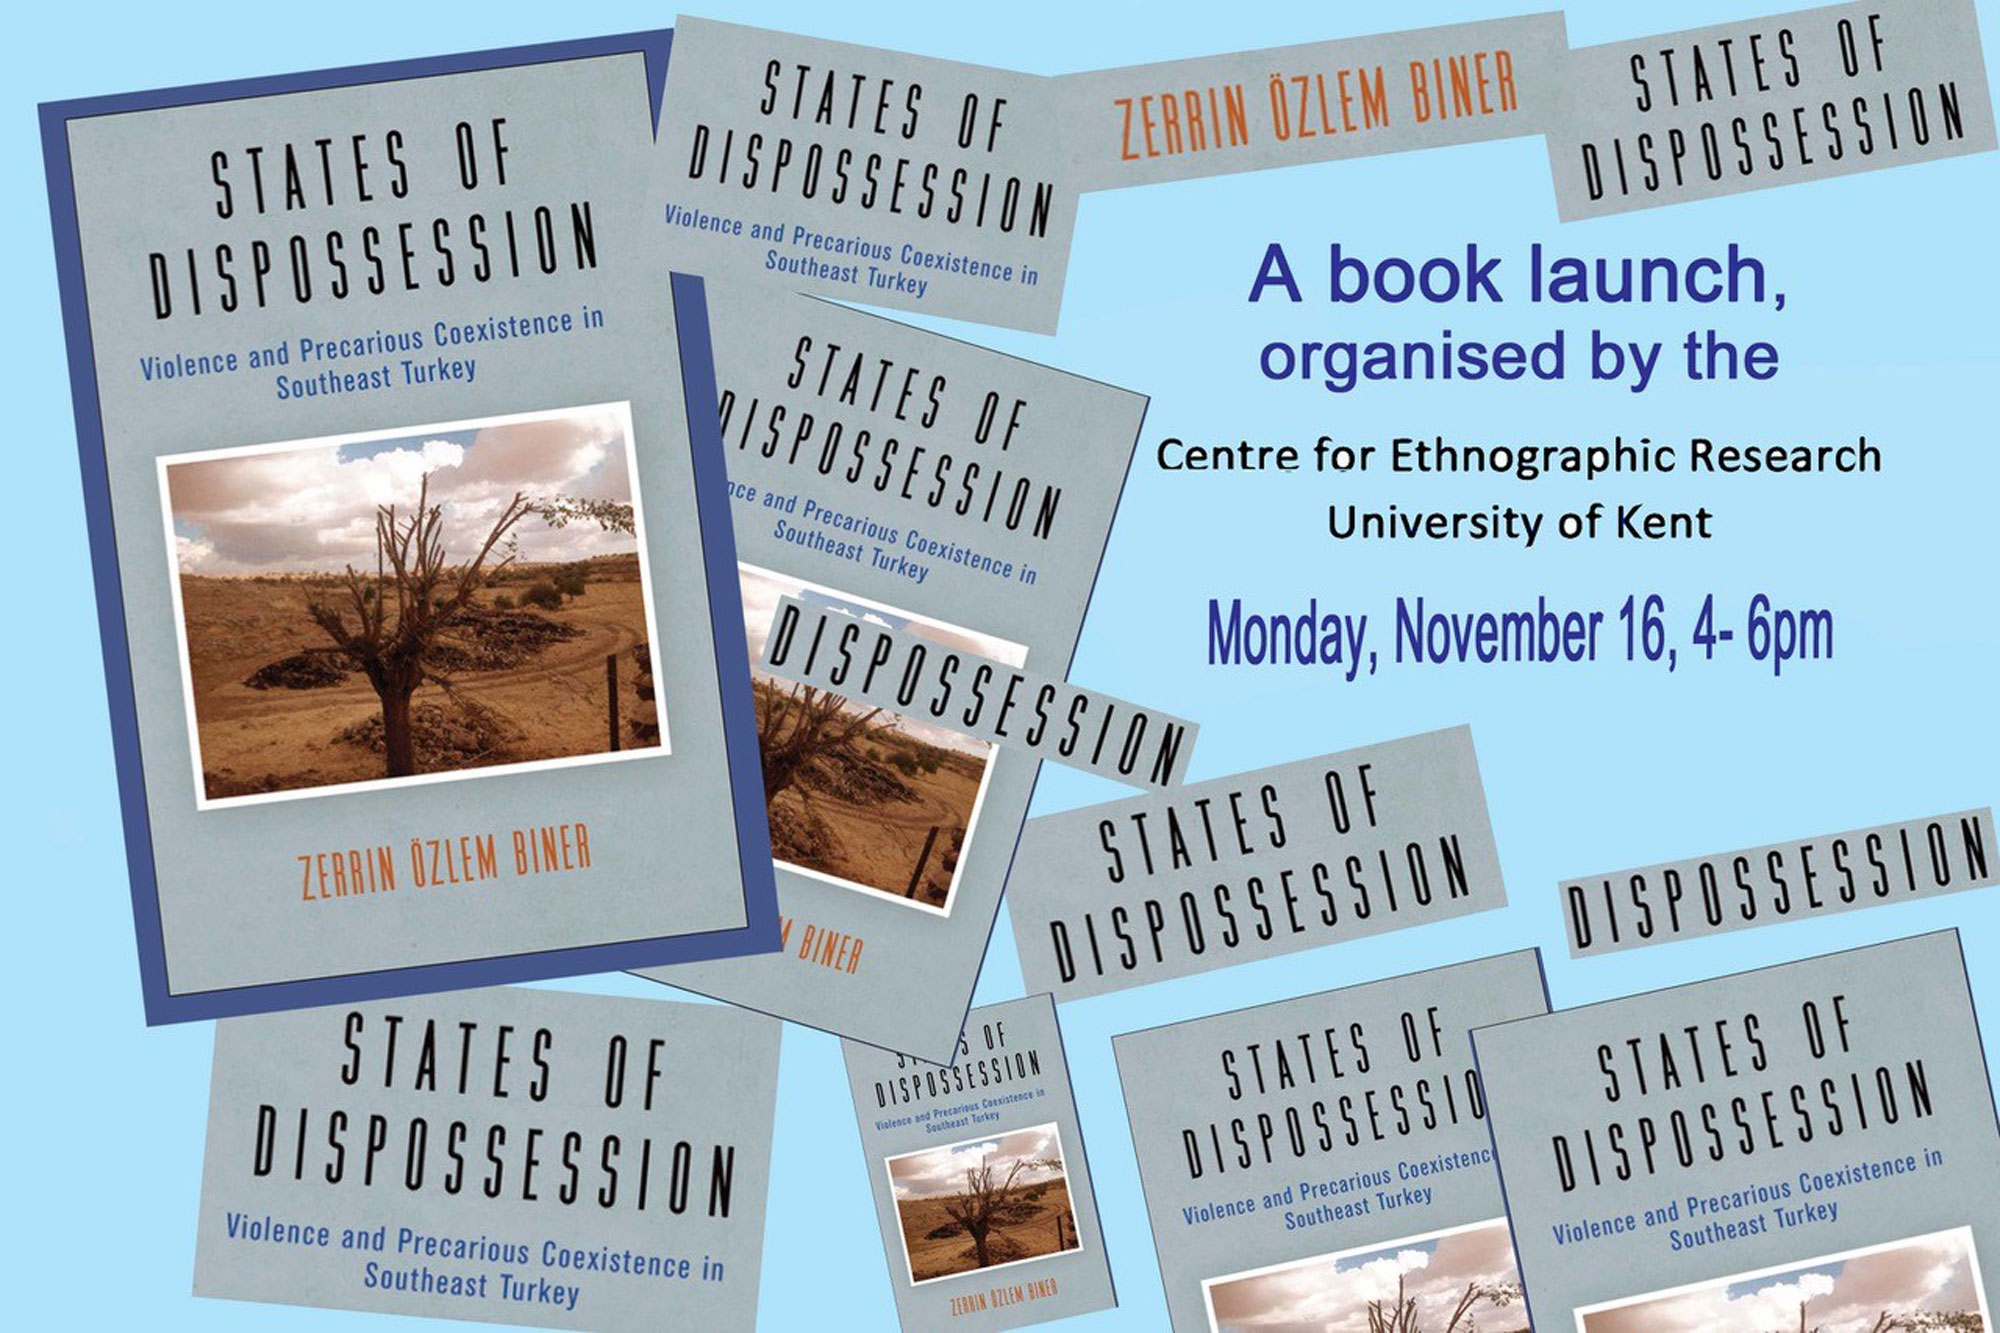 Poster for the book launch featuring images of the book's front cover